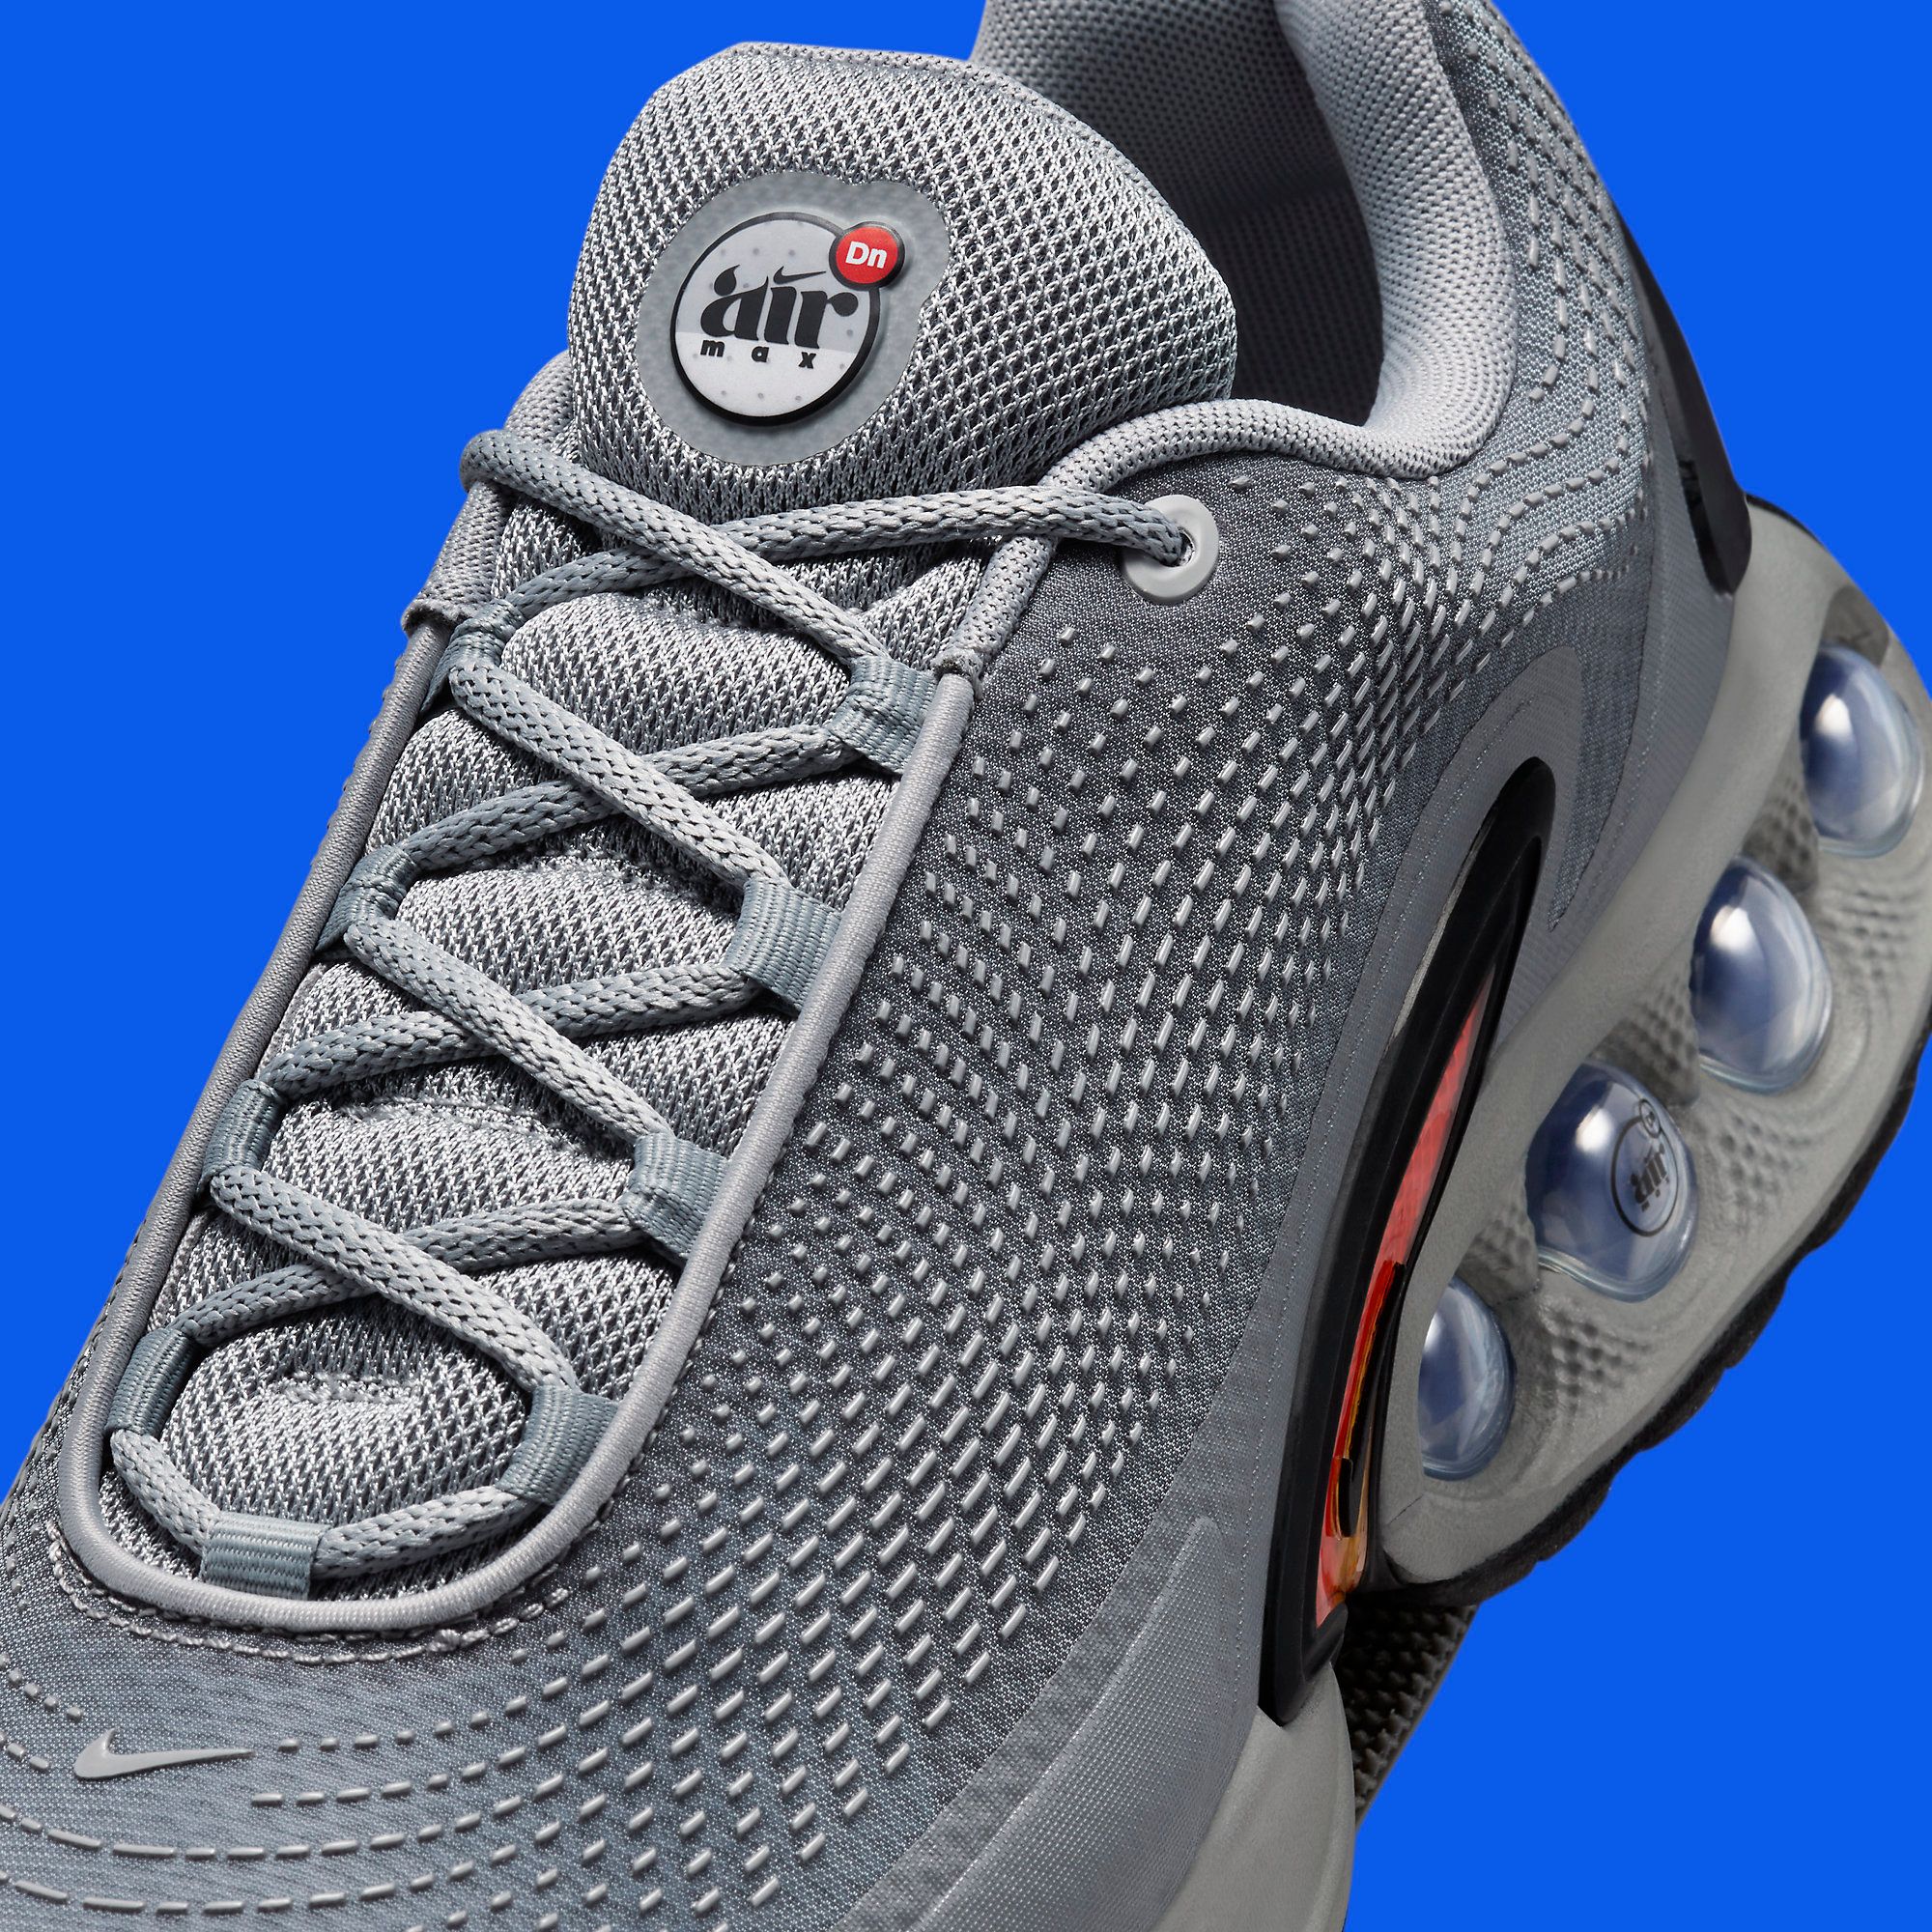 The Nike Air Max DN Appears in 